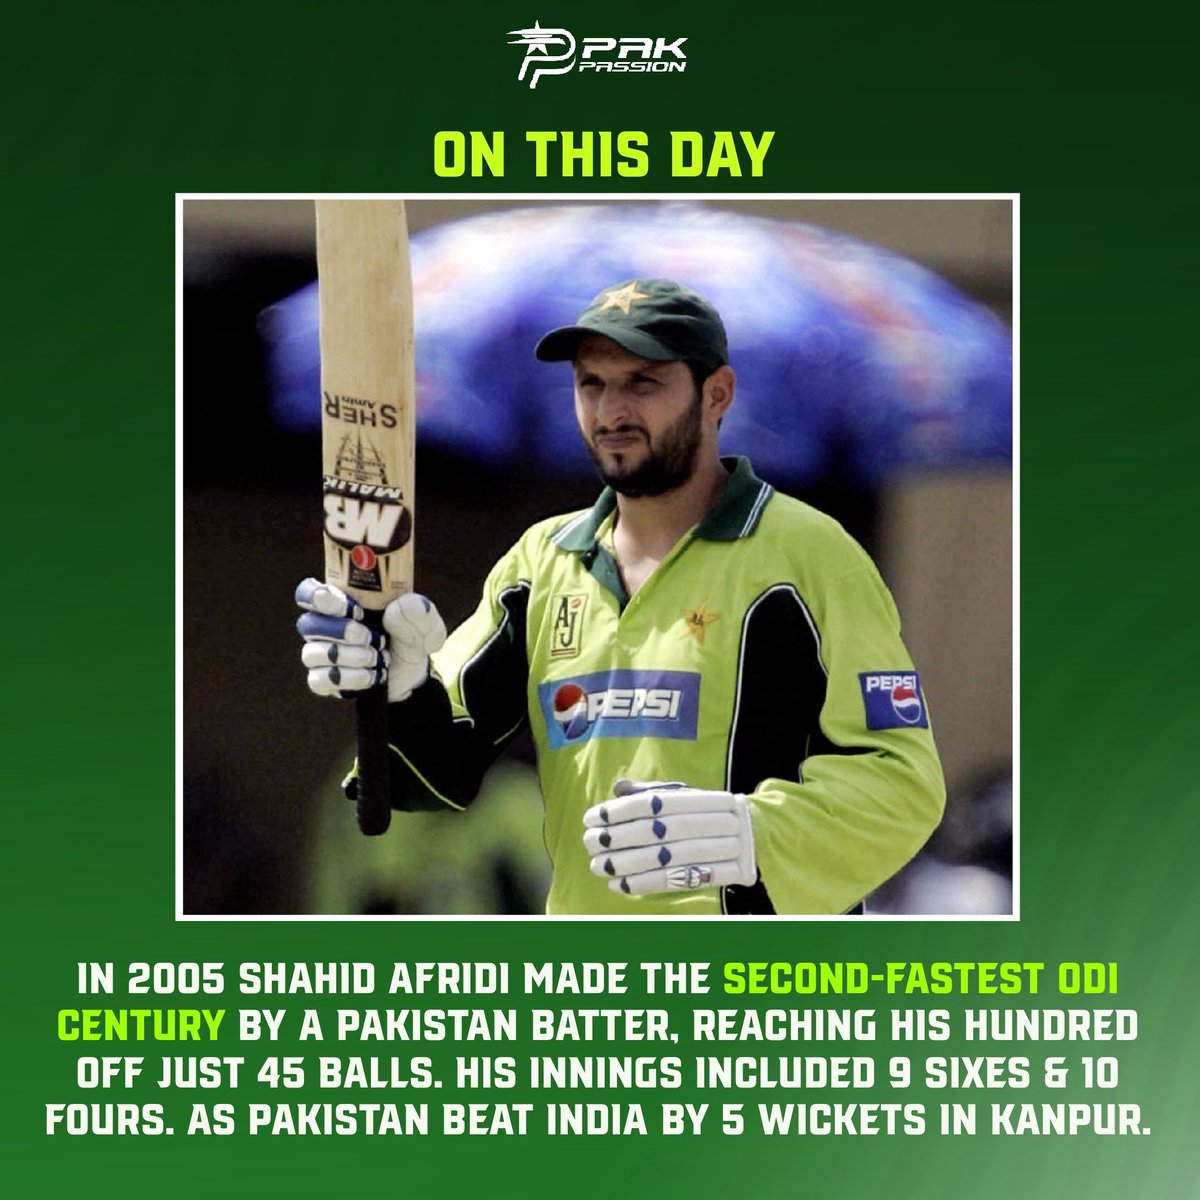 Boom Boom Special ✨️ On this day in 2005, Shahid Afridi stormed the Kanpur stadium with a special innings against 🇮🇳 #PakPassion #ShahidAfridi